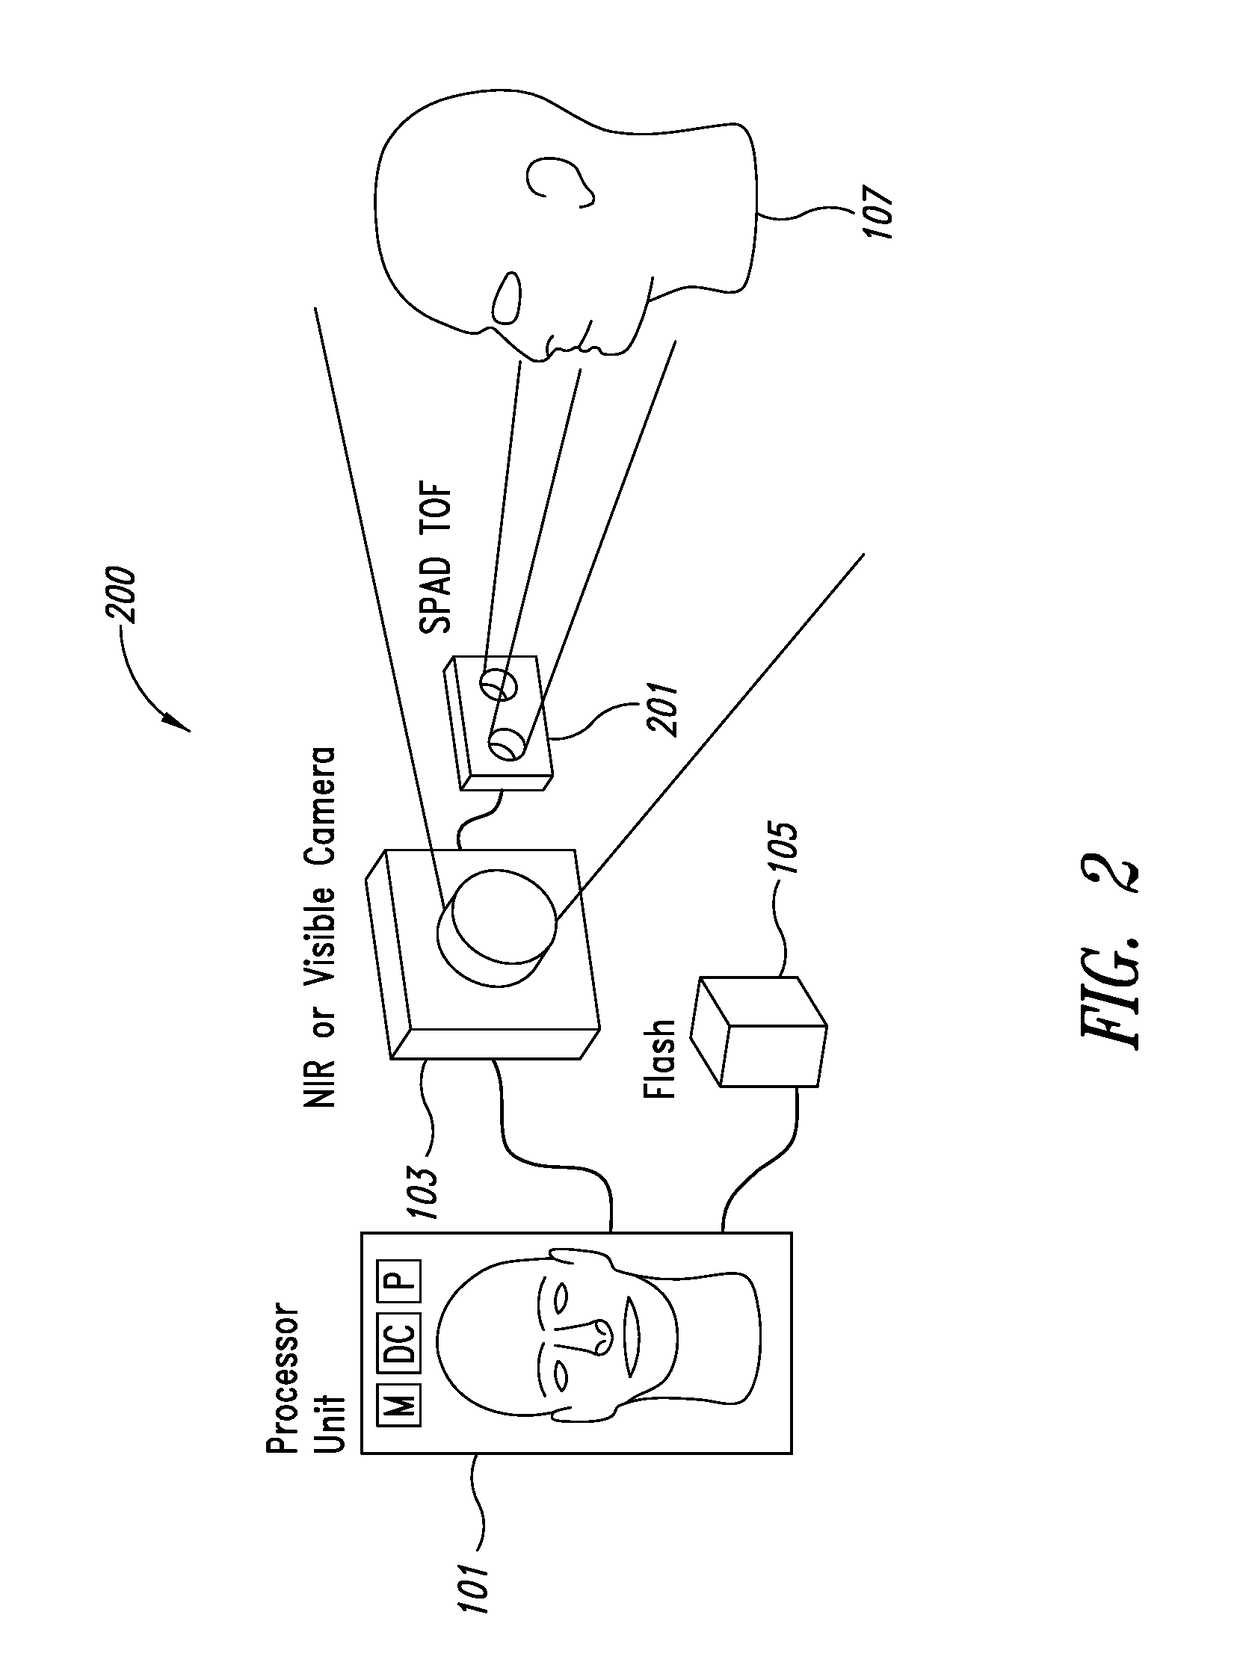 Image capturing apparatus, system and method